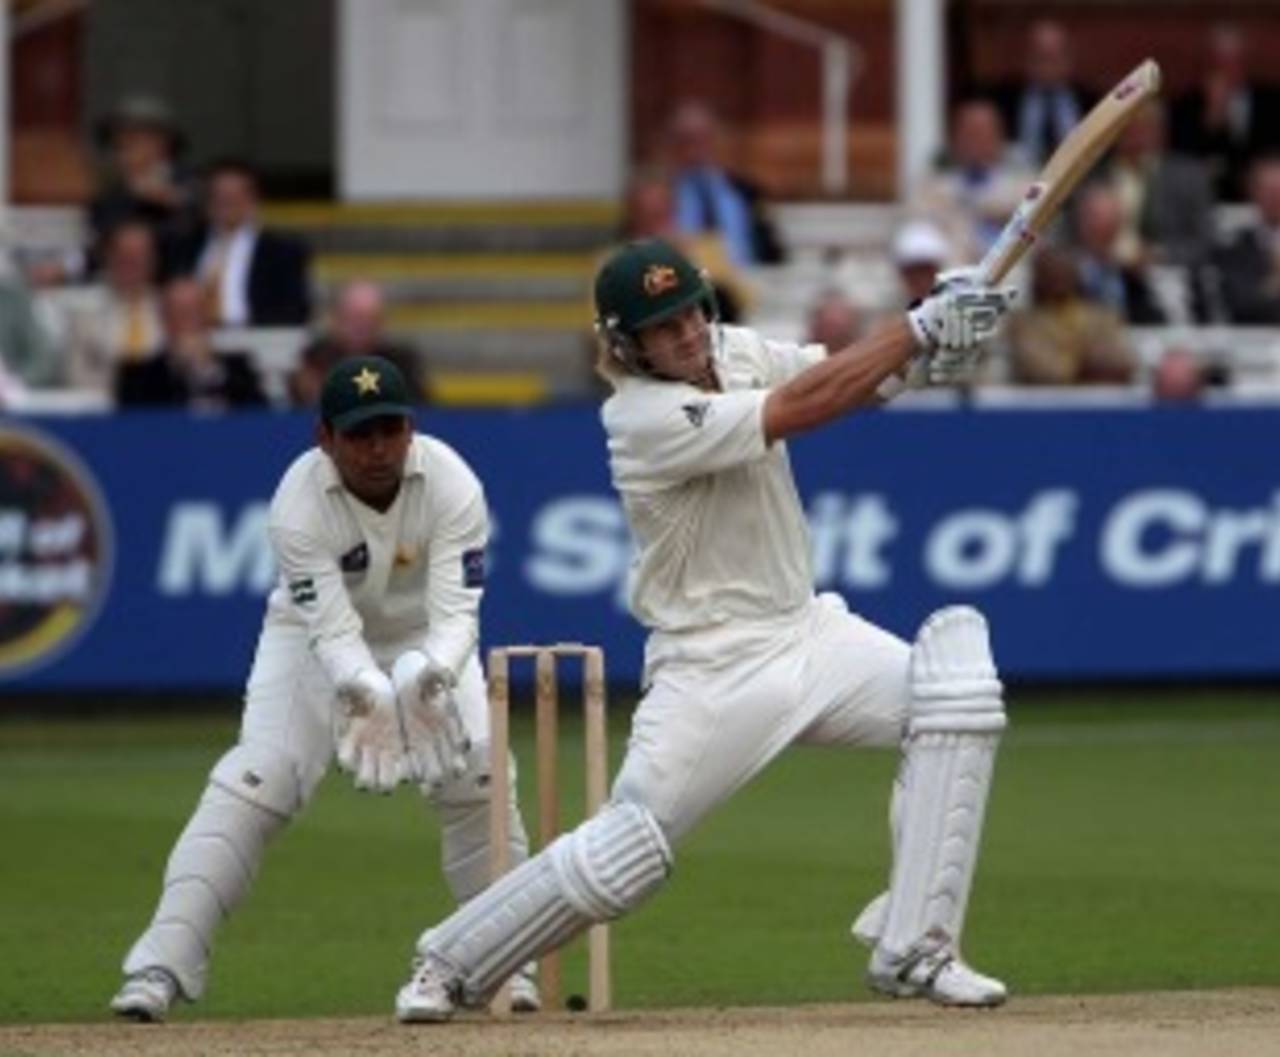 Shane Watson added 31 runs to his five wickets, Pakistan v Australia, 1st Test, Lord's, July 14, 2010